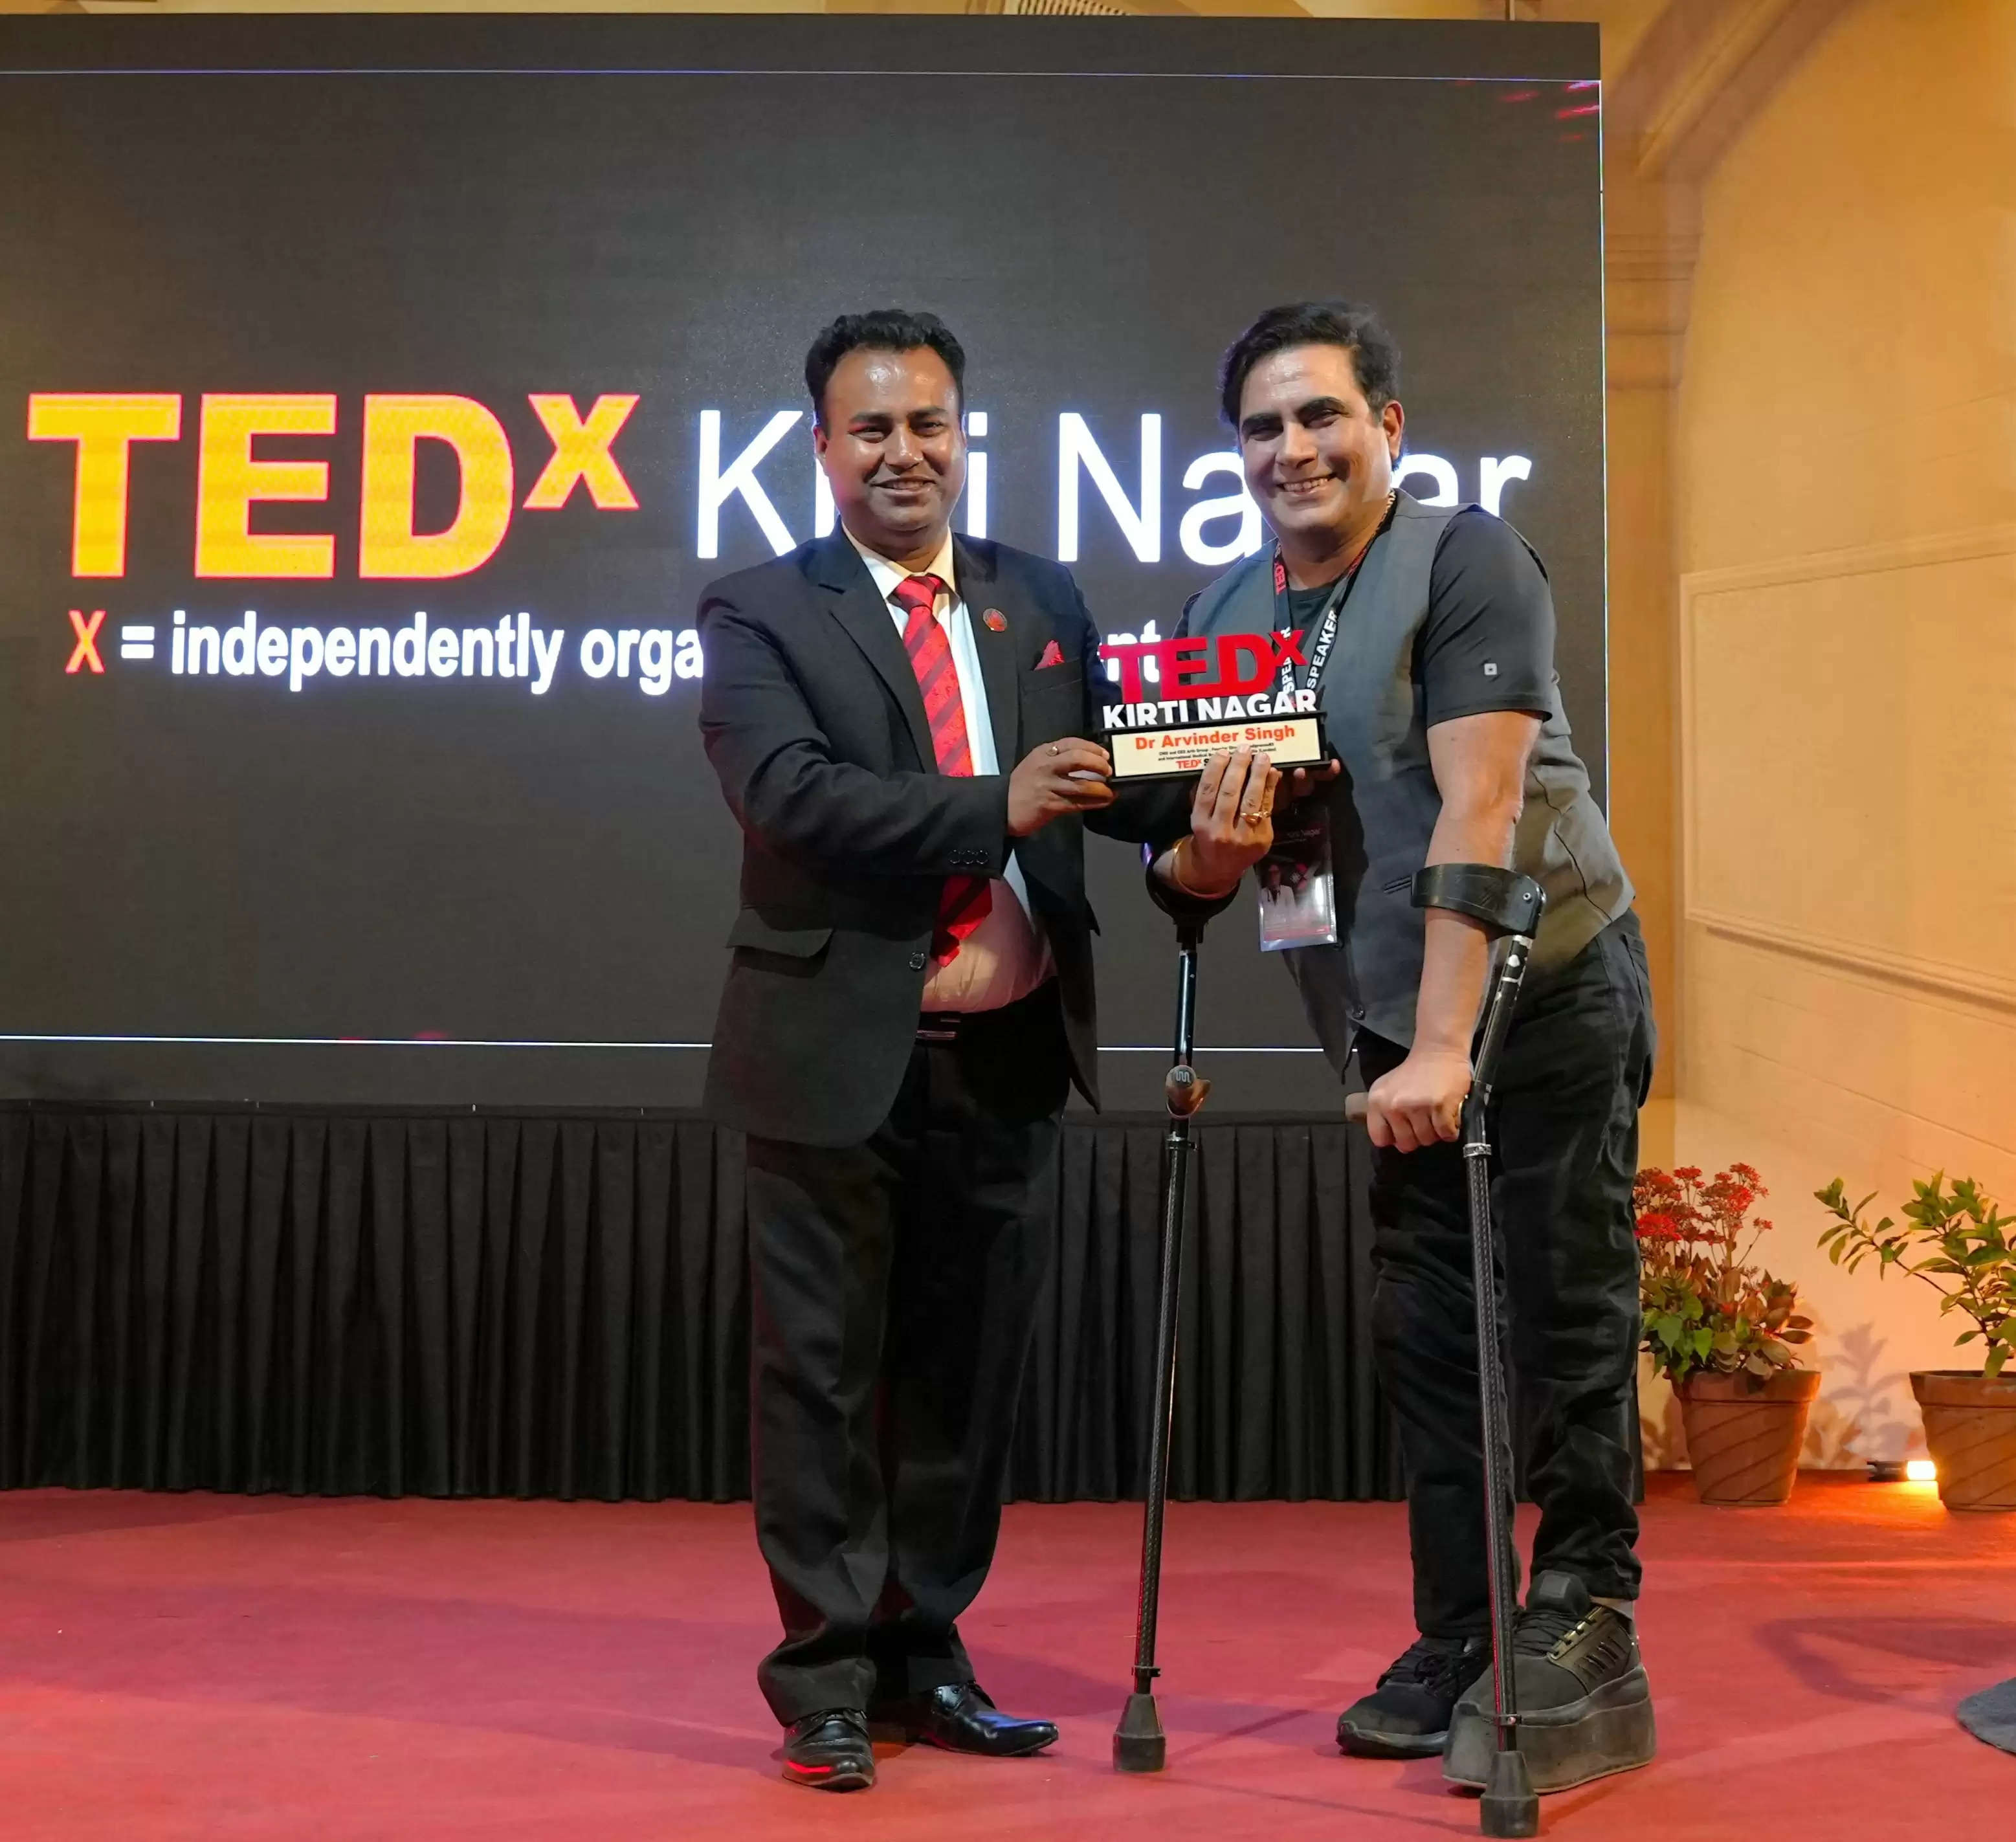 Soft Skills essential for success book knowledge can help in getting a better stepping stone to a fruitful career, Dr Arvinder Singh delivers TEDx talk at Kirti Nagar Jaipur